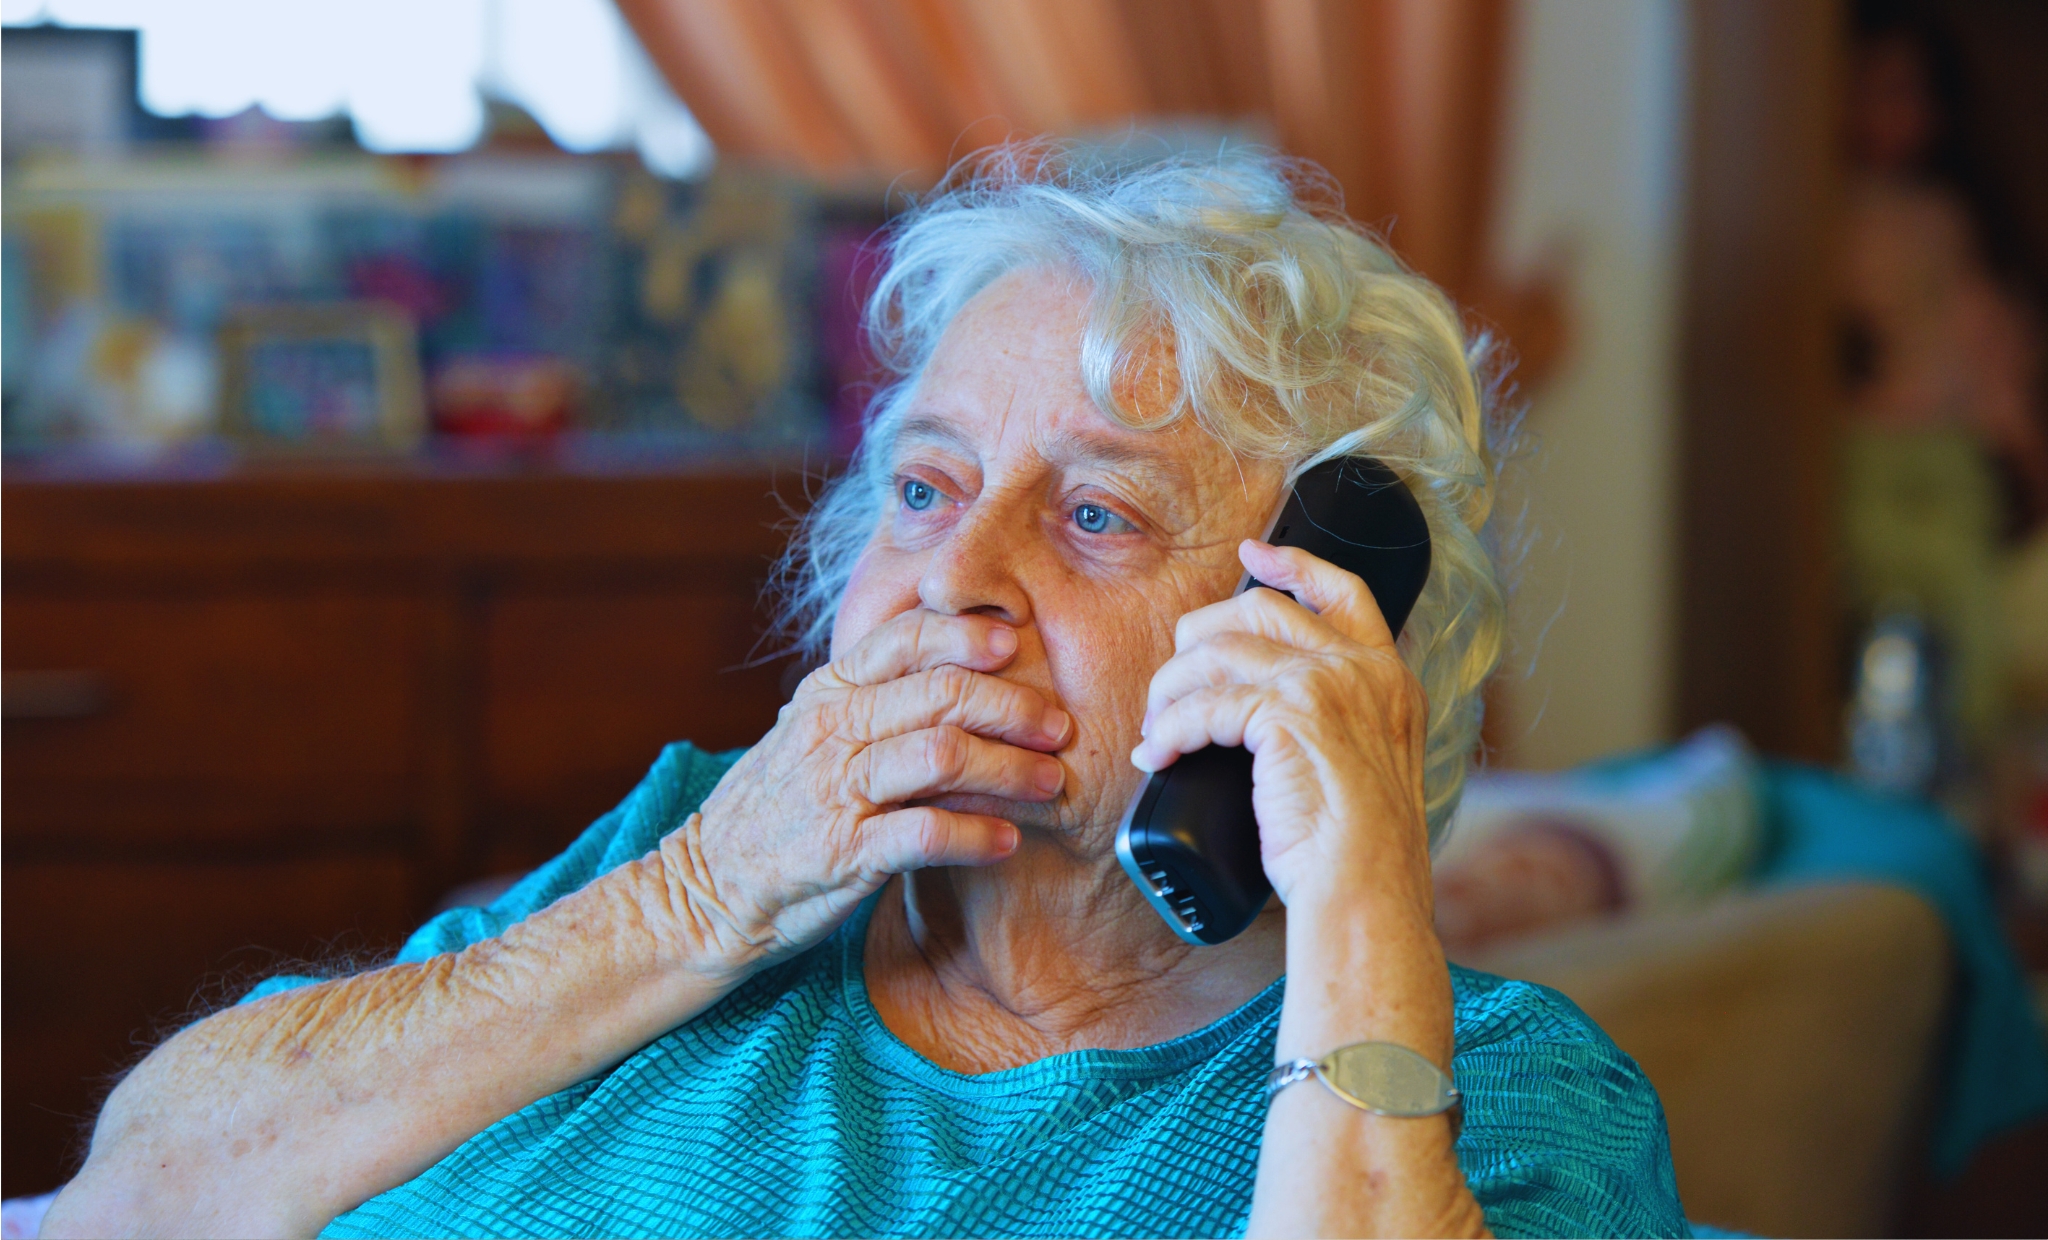 VoIP Specialist Phonely to Take a Stand Against Phone Scams That Target Older People